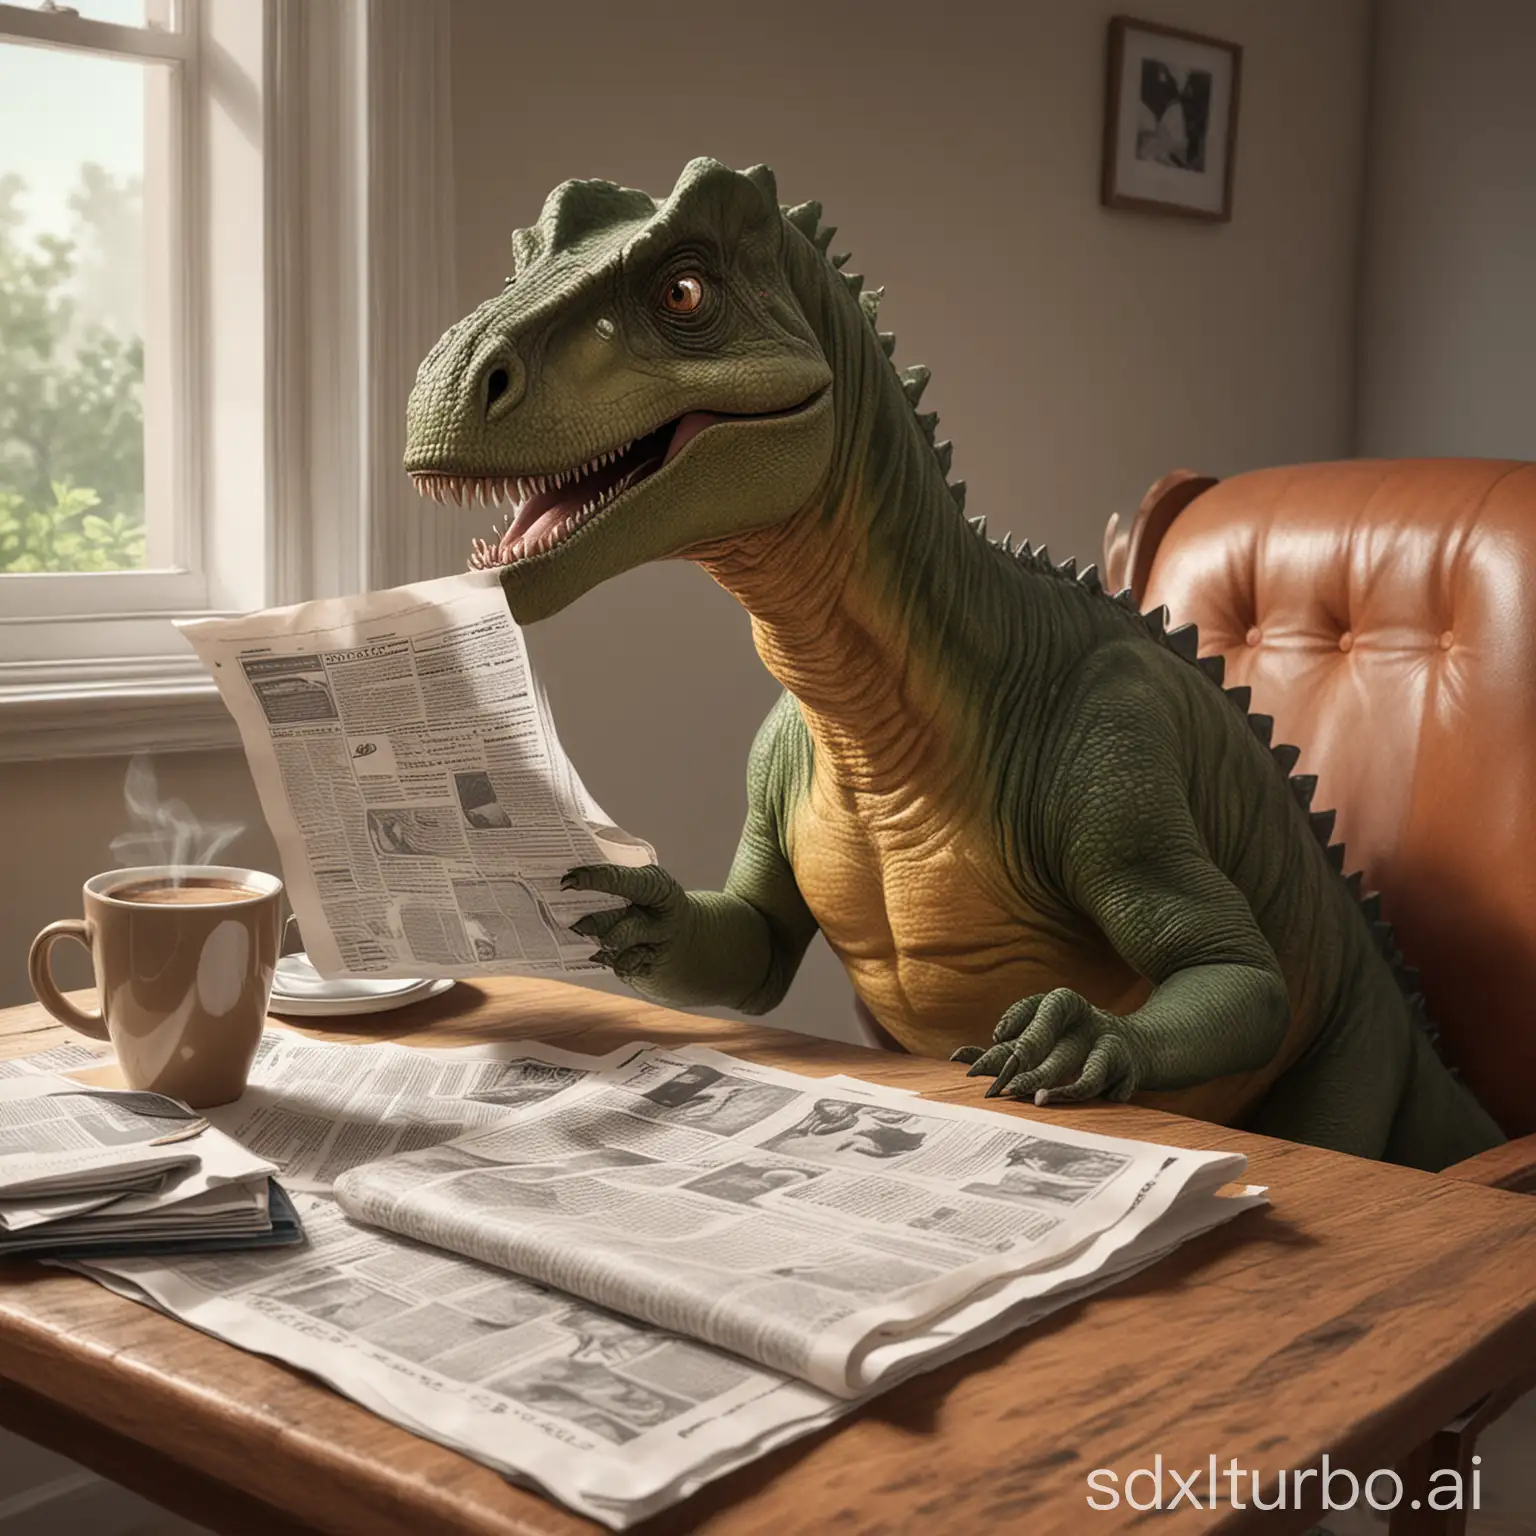 A drawing of a dinosaur sipping coffee and reading a newspaper. The dinosaur has a small reading glass in its eye, with a cup of coffee on the table and a bag on the nearby chair.